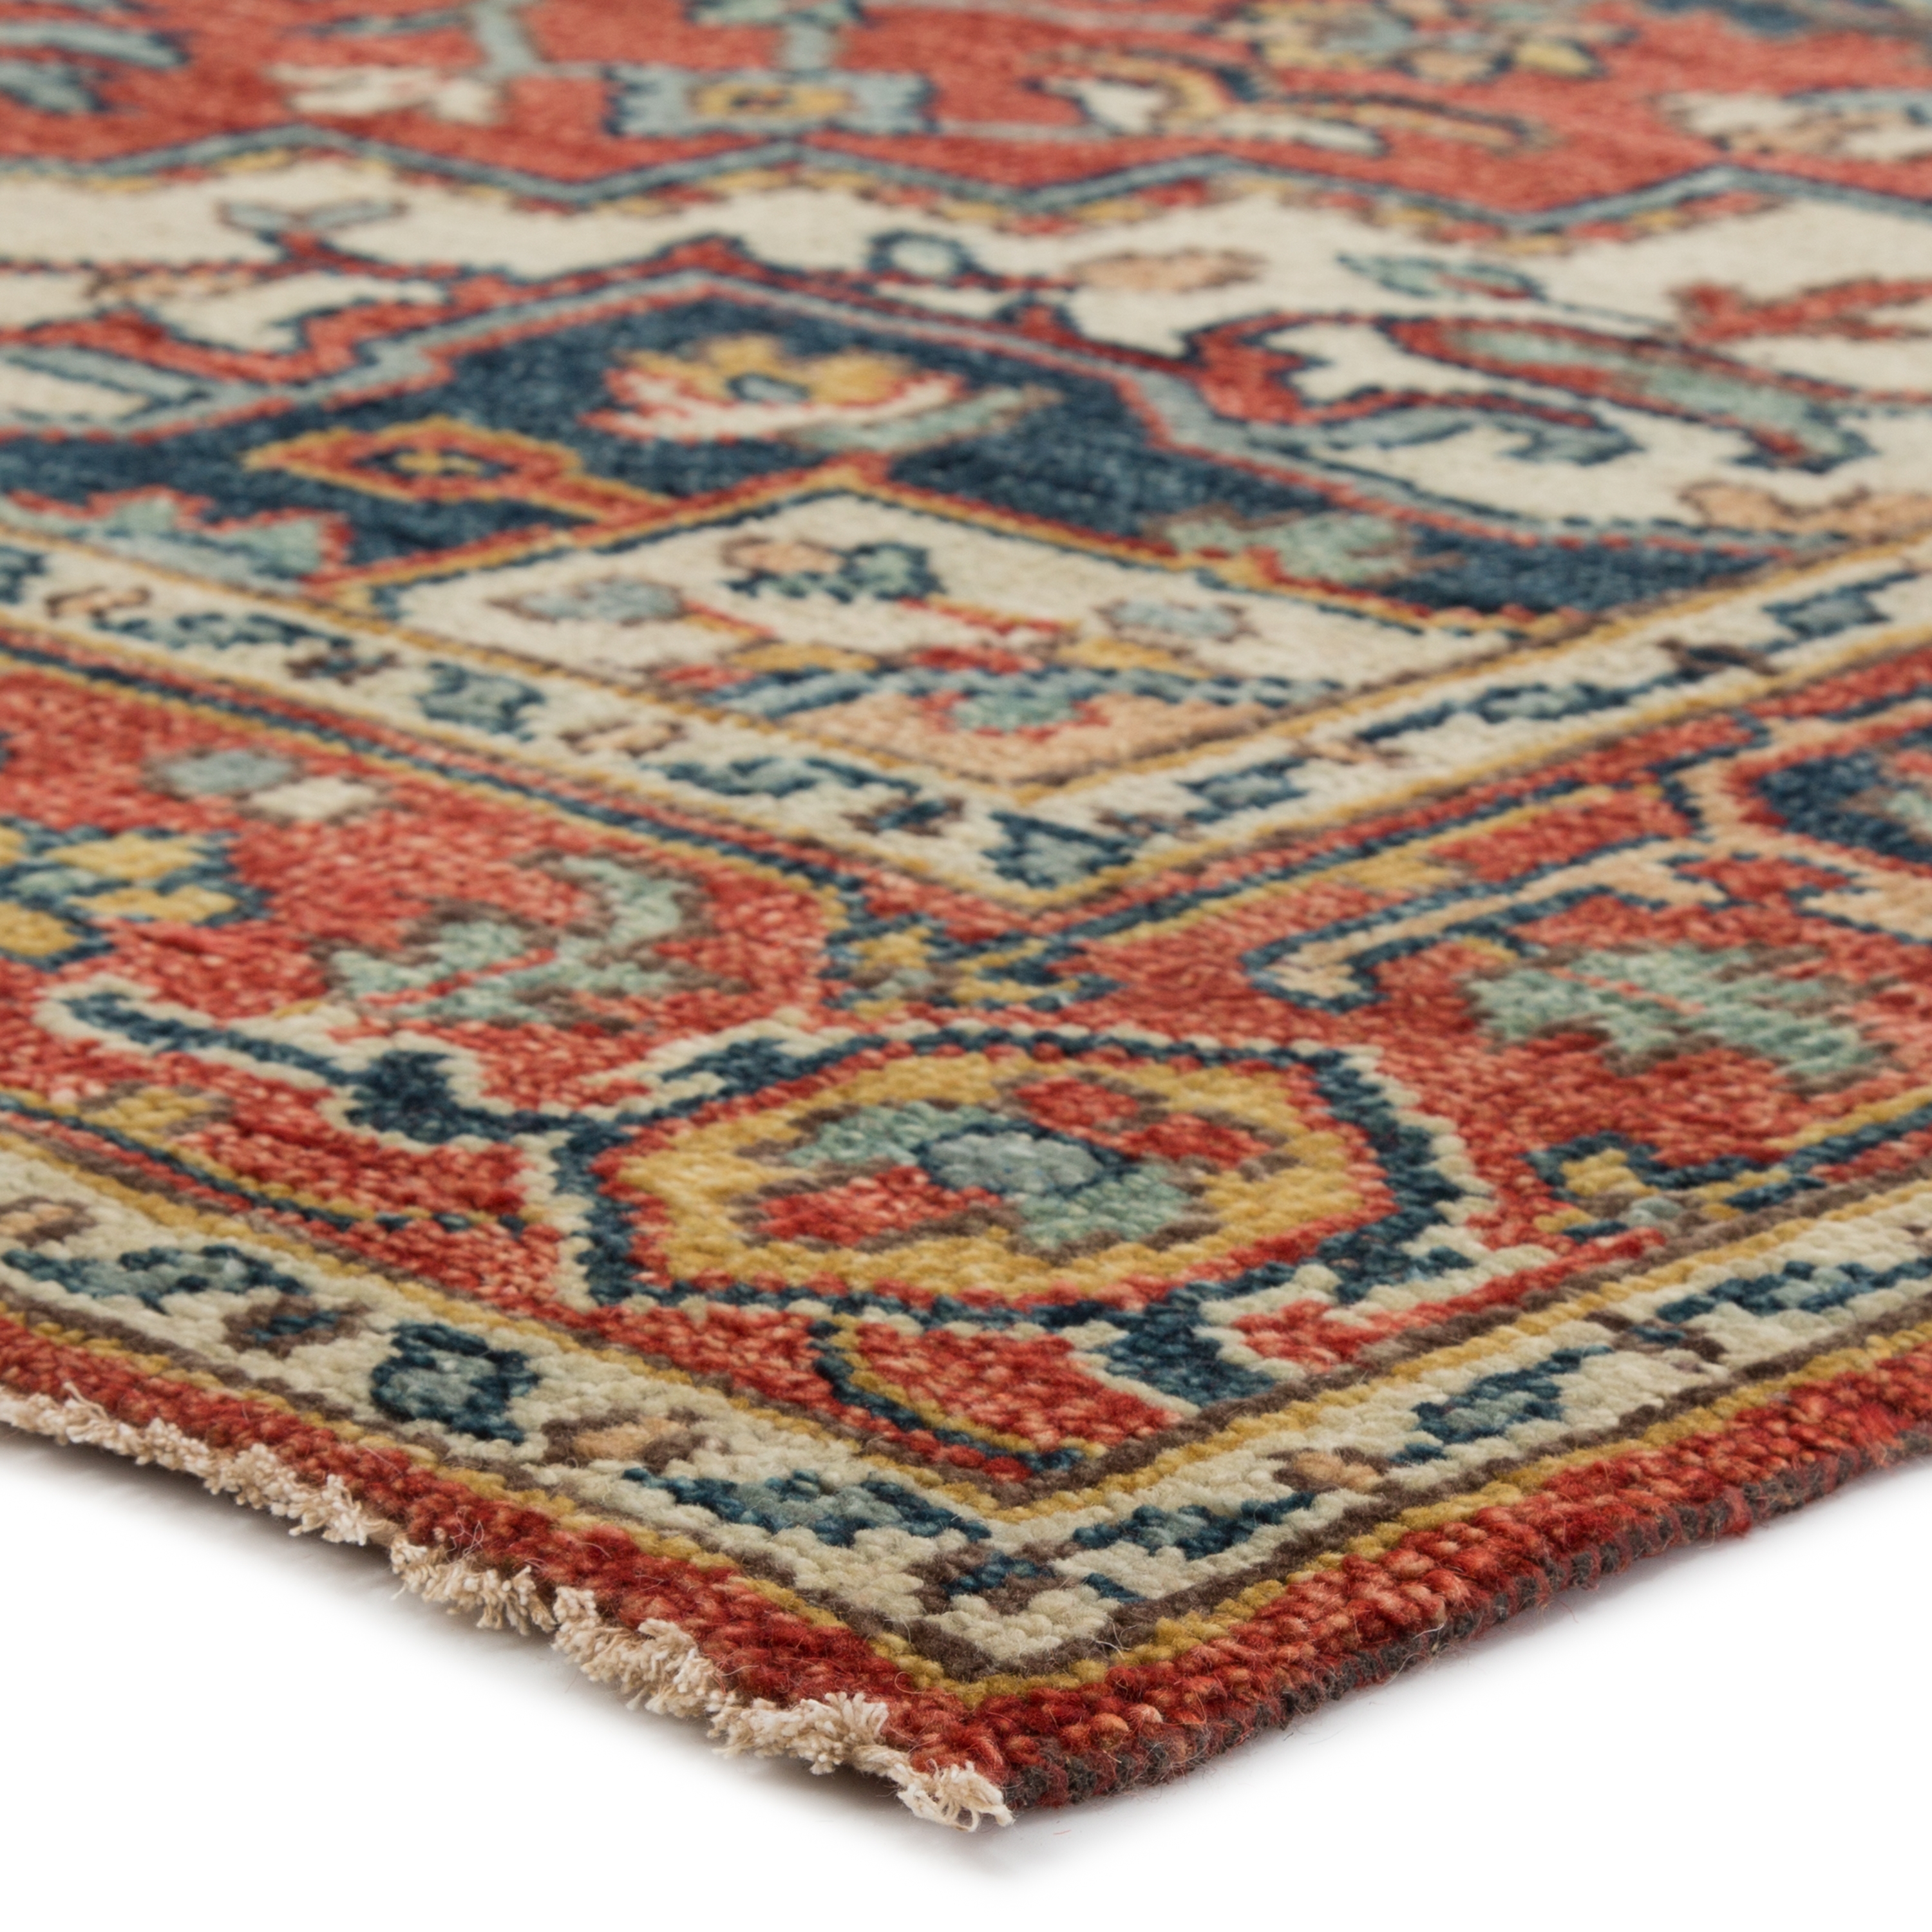 Willa Hand-Knotted Medallion Red/ Multicolor Area Rug (6'X9') - Image 1